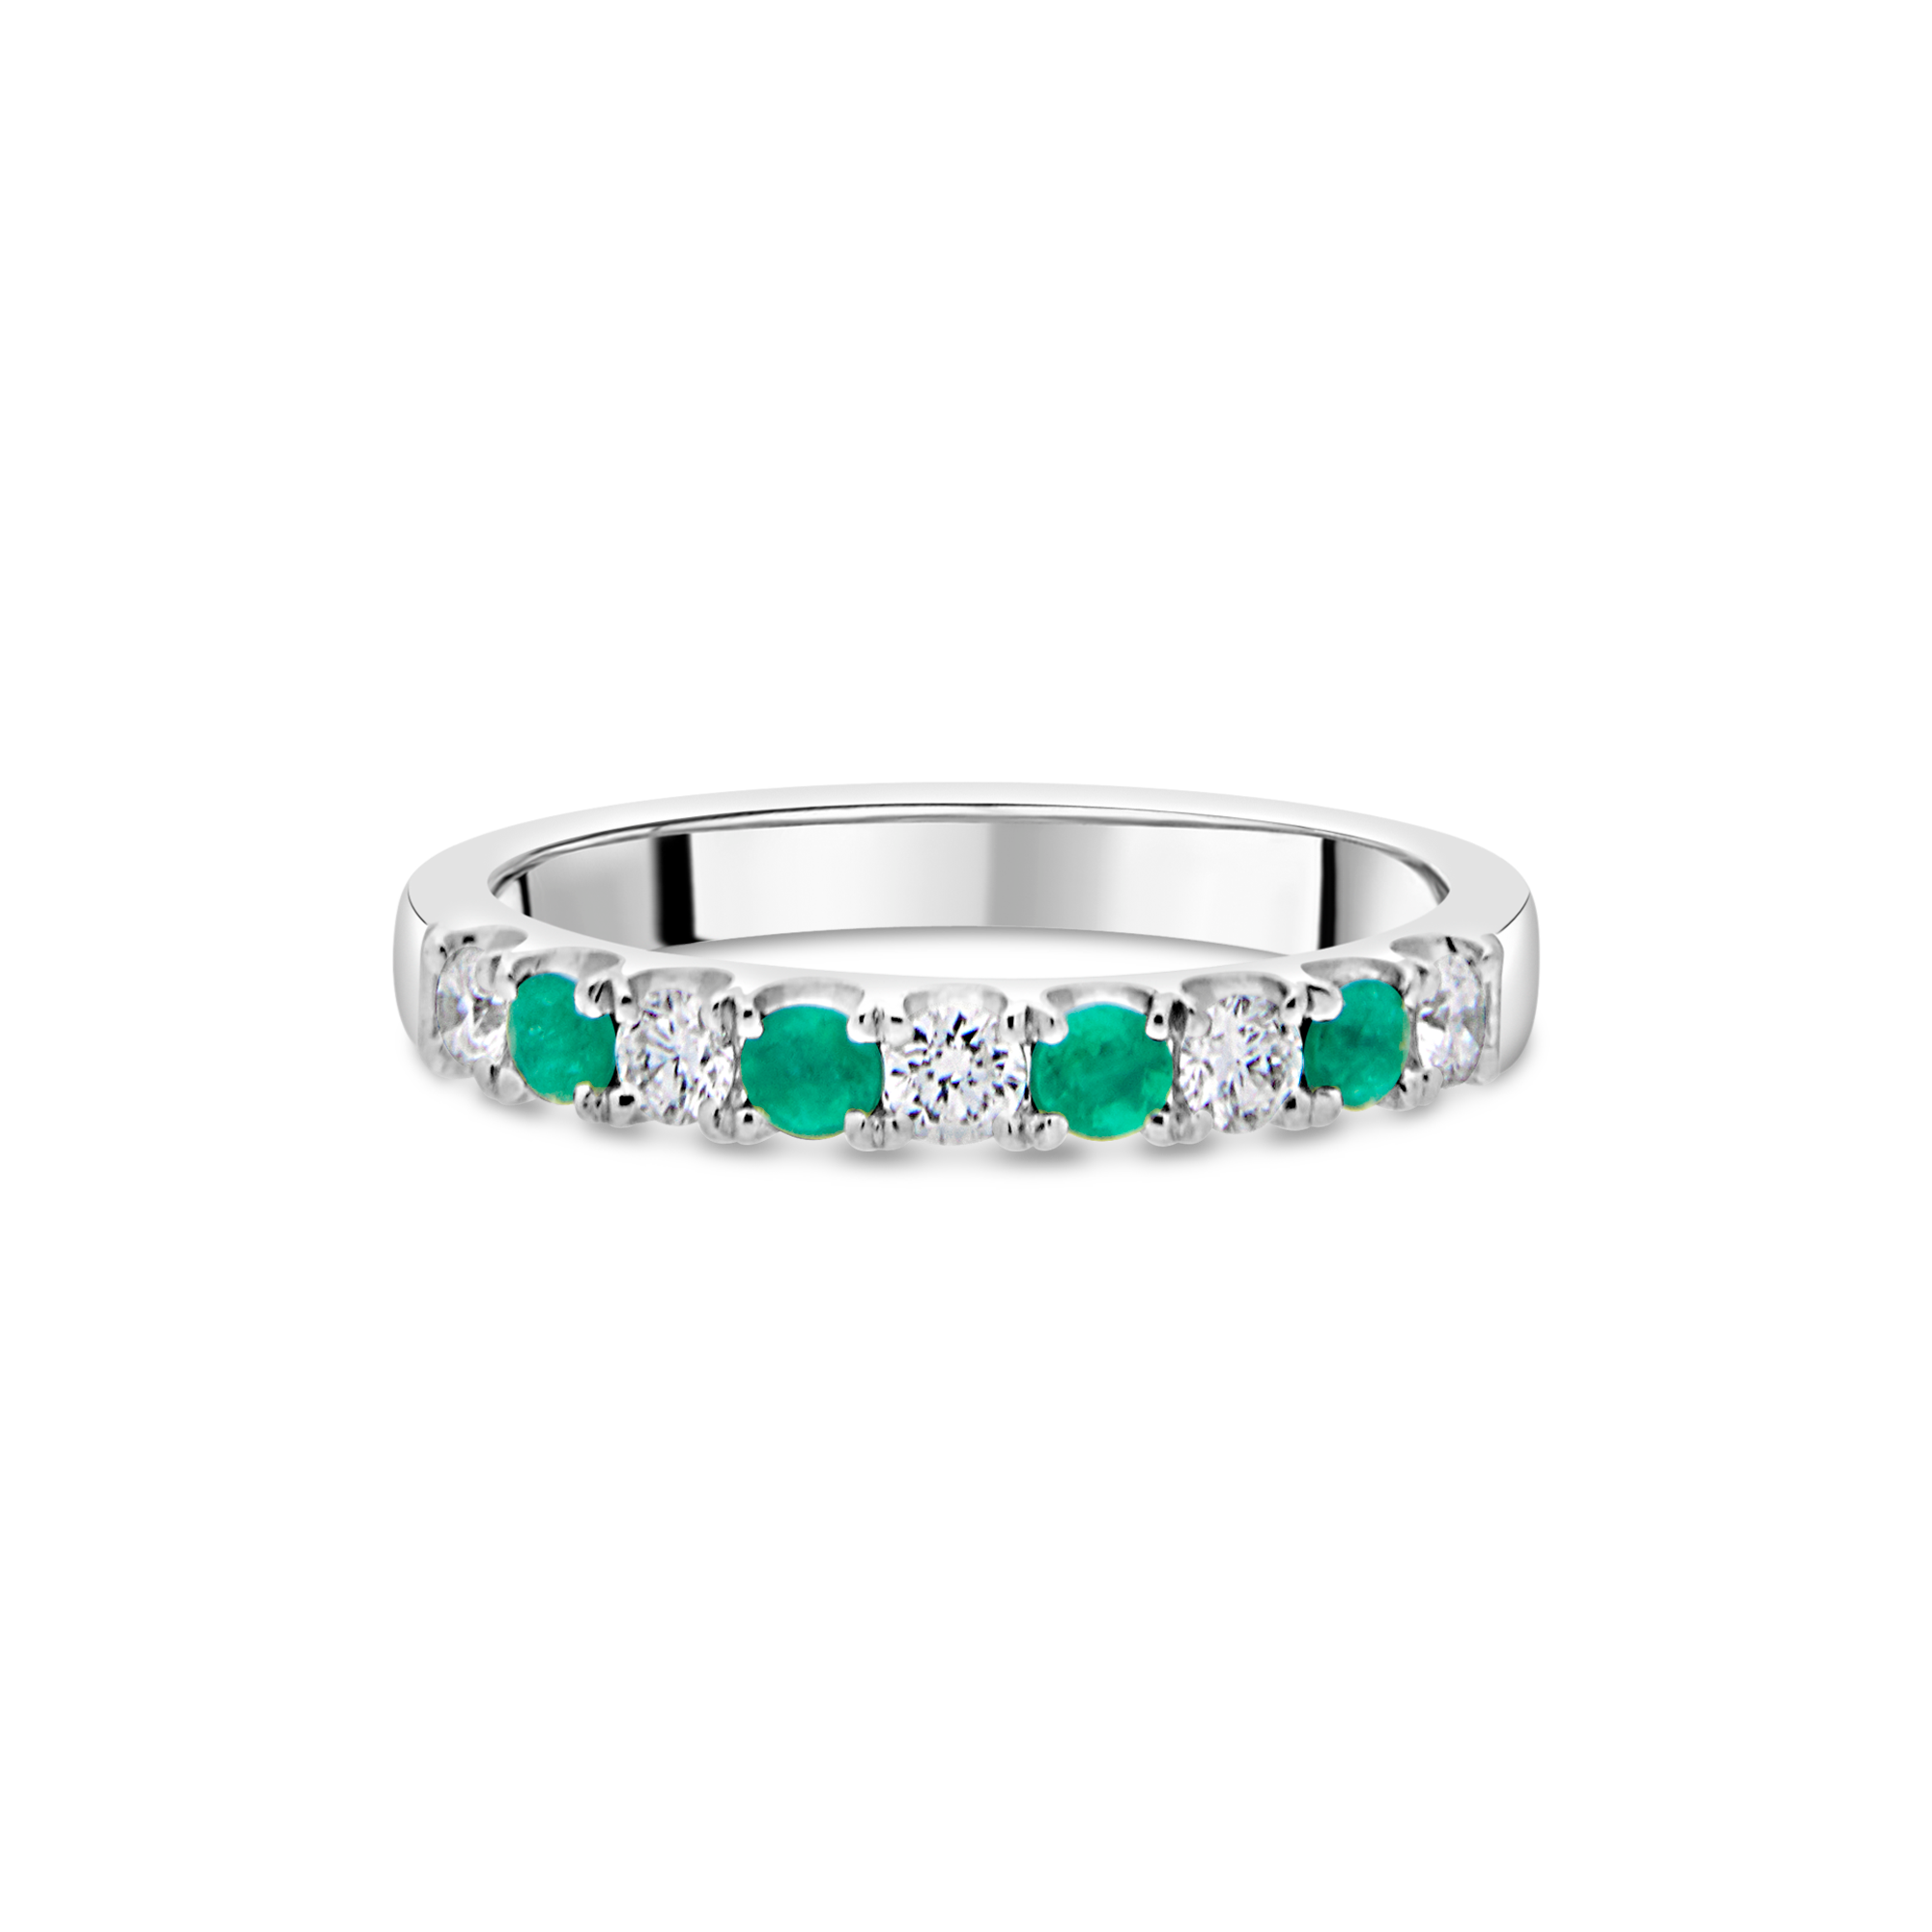 The "Chantilly" with Emerald and Diamond, Platinum